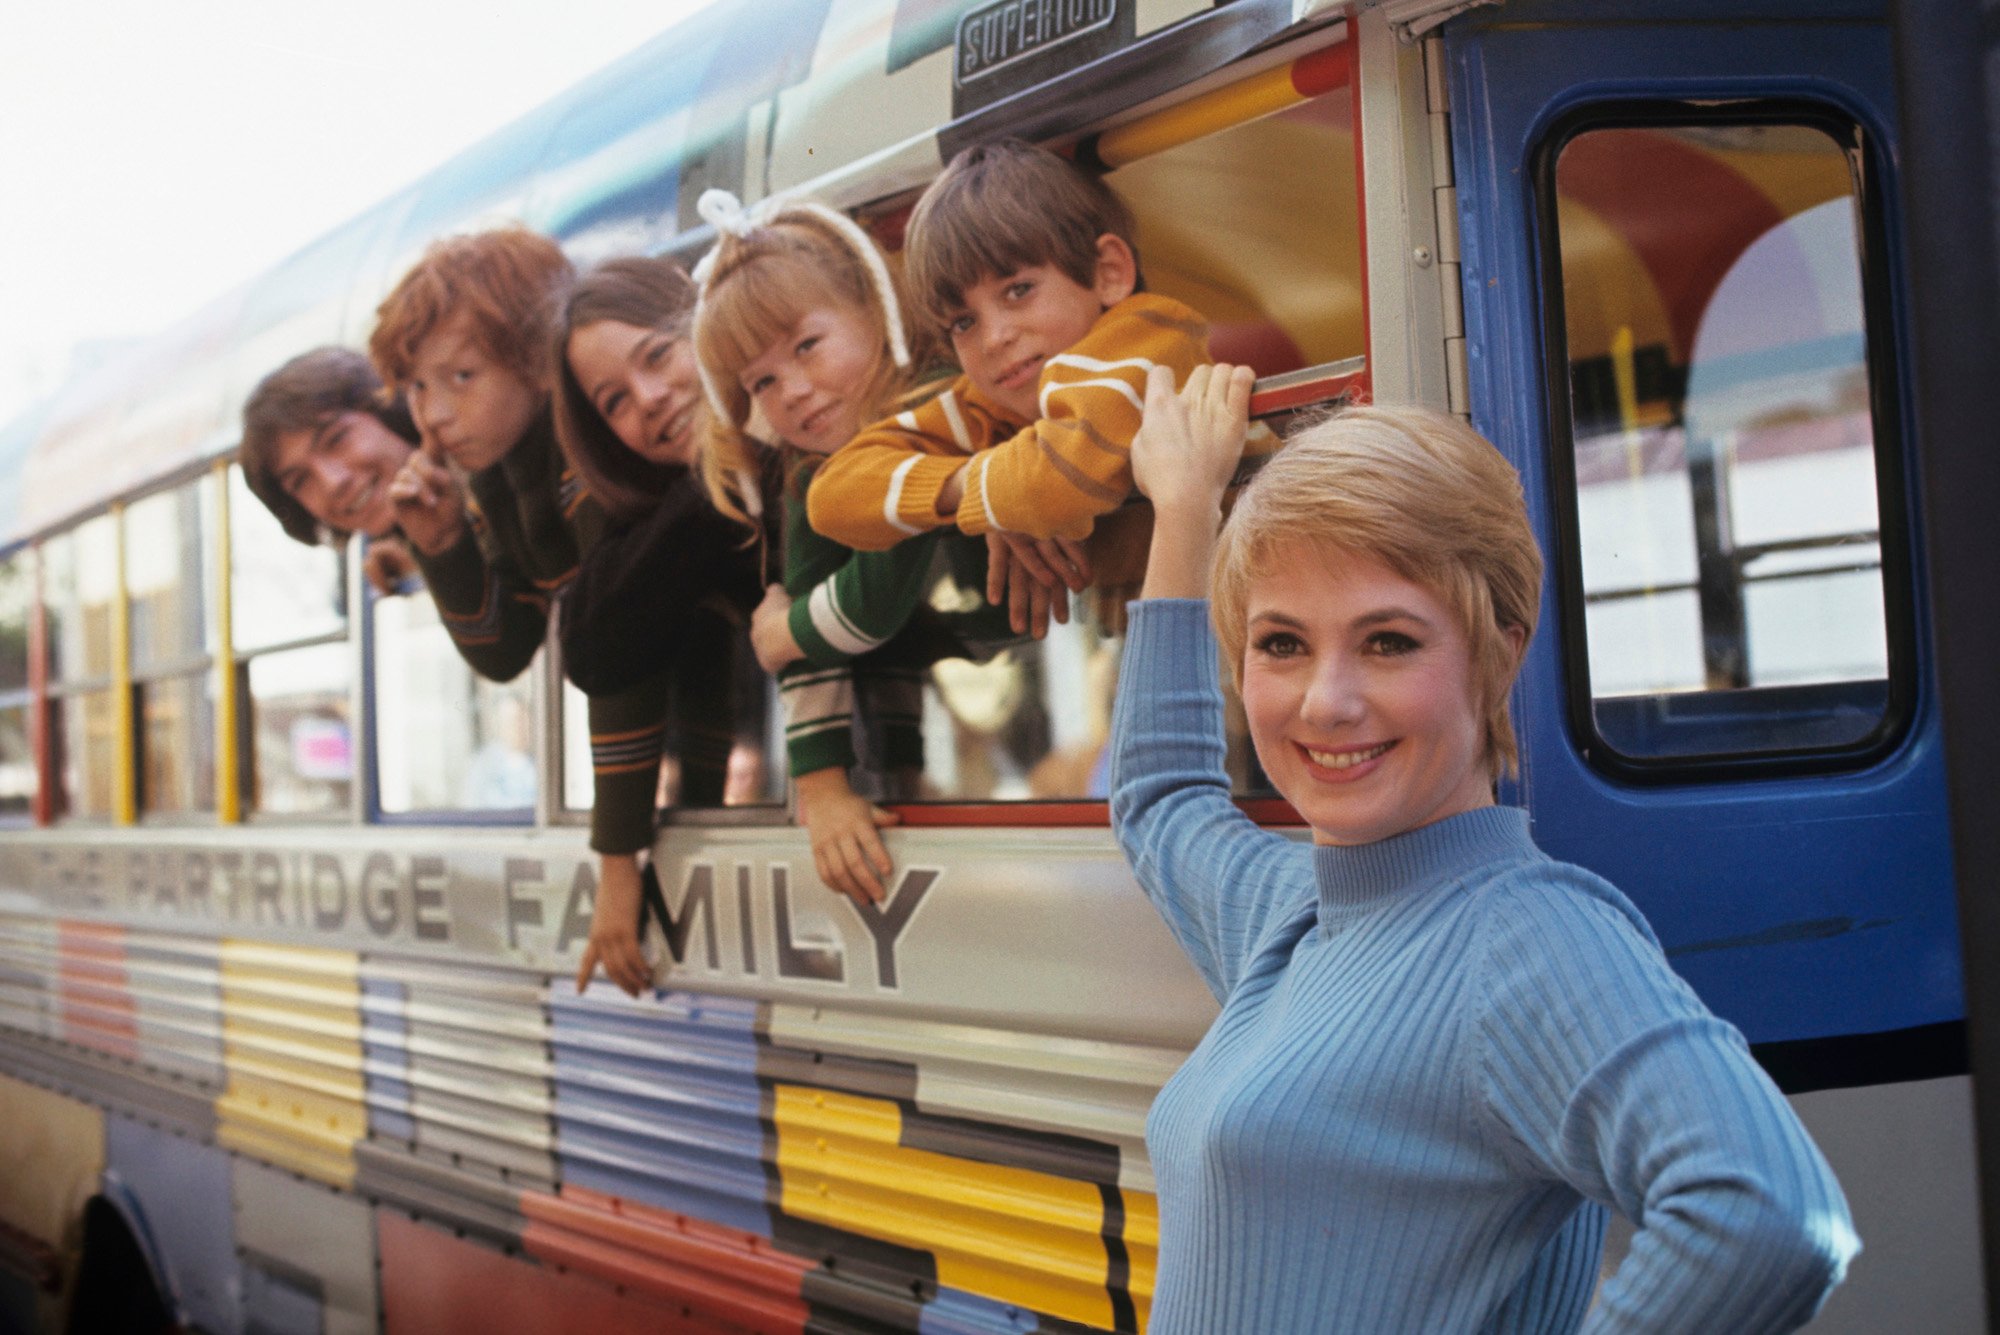 (L-R) David Cassidy, Danny Bonaduce, Susan Dey, Suzanne Crough, Jeremy Gelbwaks, and Shirley Jones with the painted bus in color